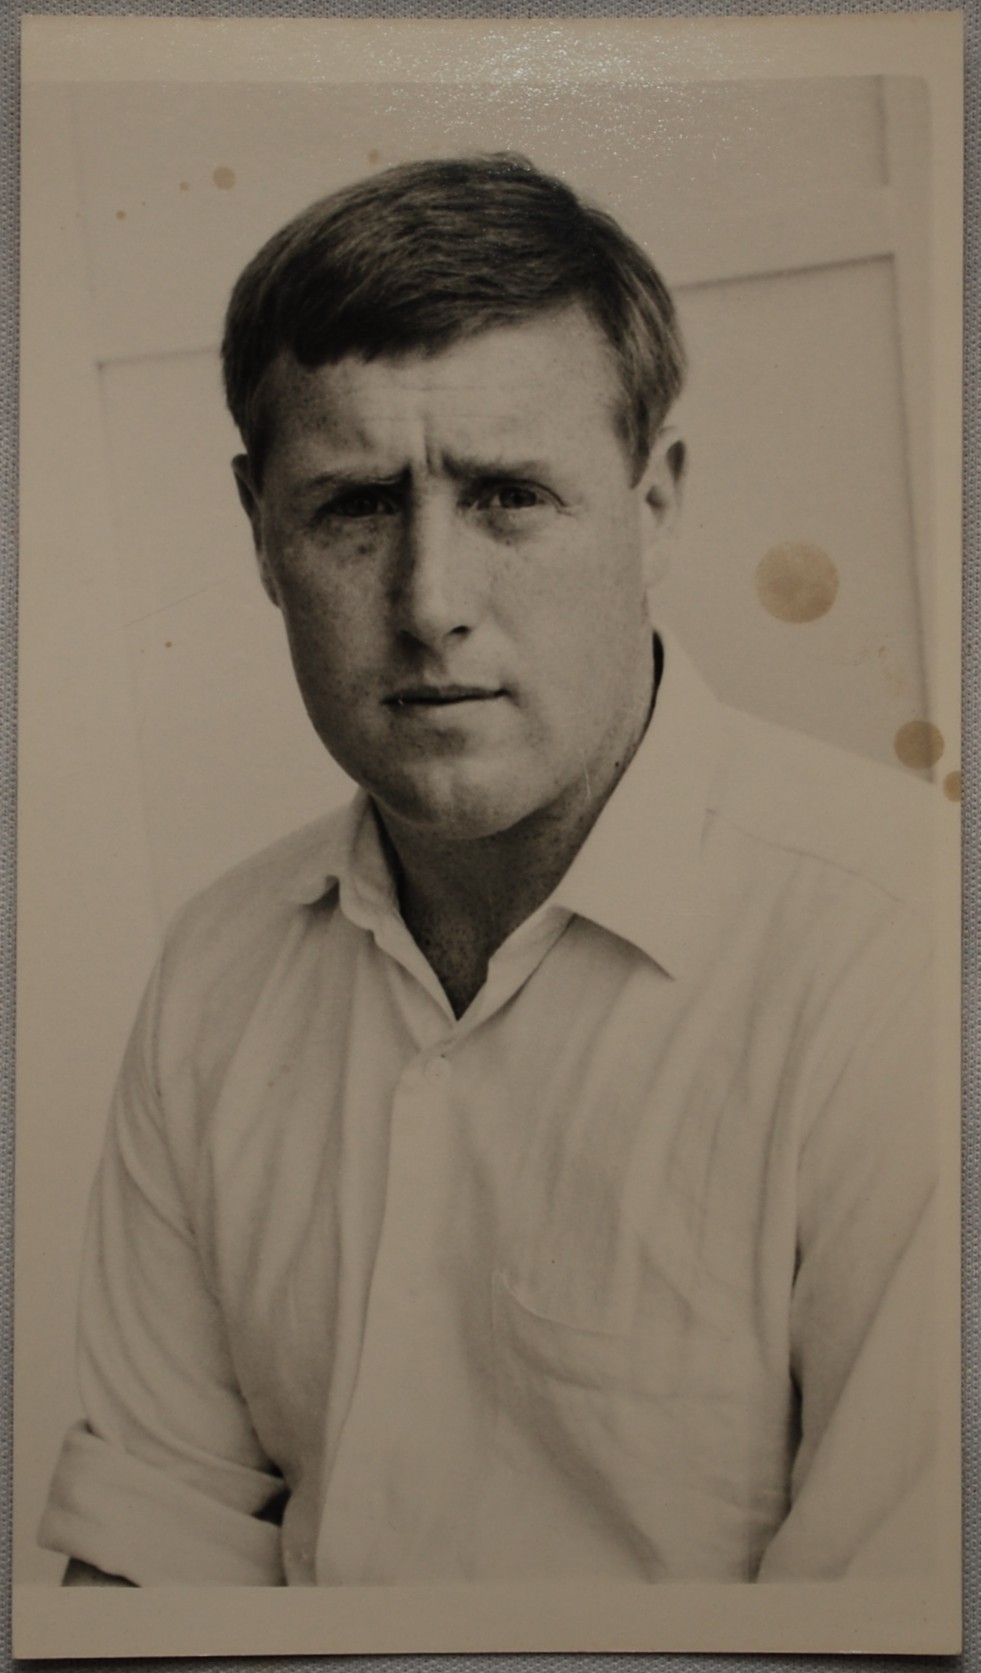 Peter T. Marner. Lancashire & Leicestershire 1952-1970. Mono real photograph plain back postcard of